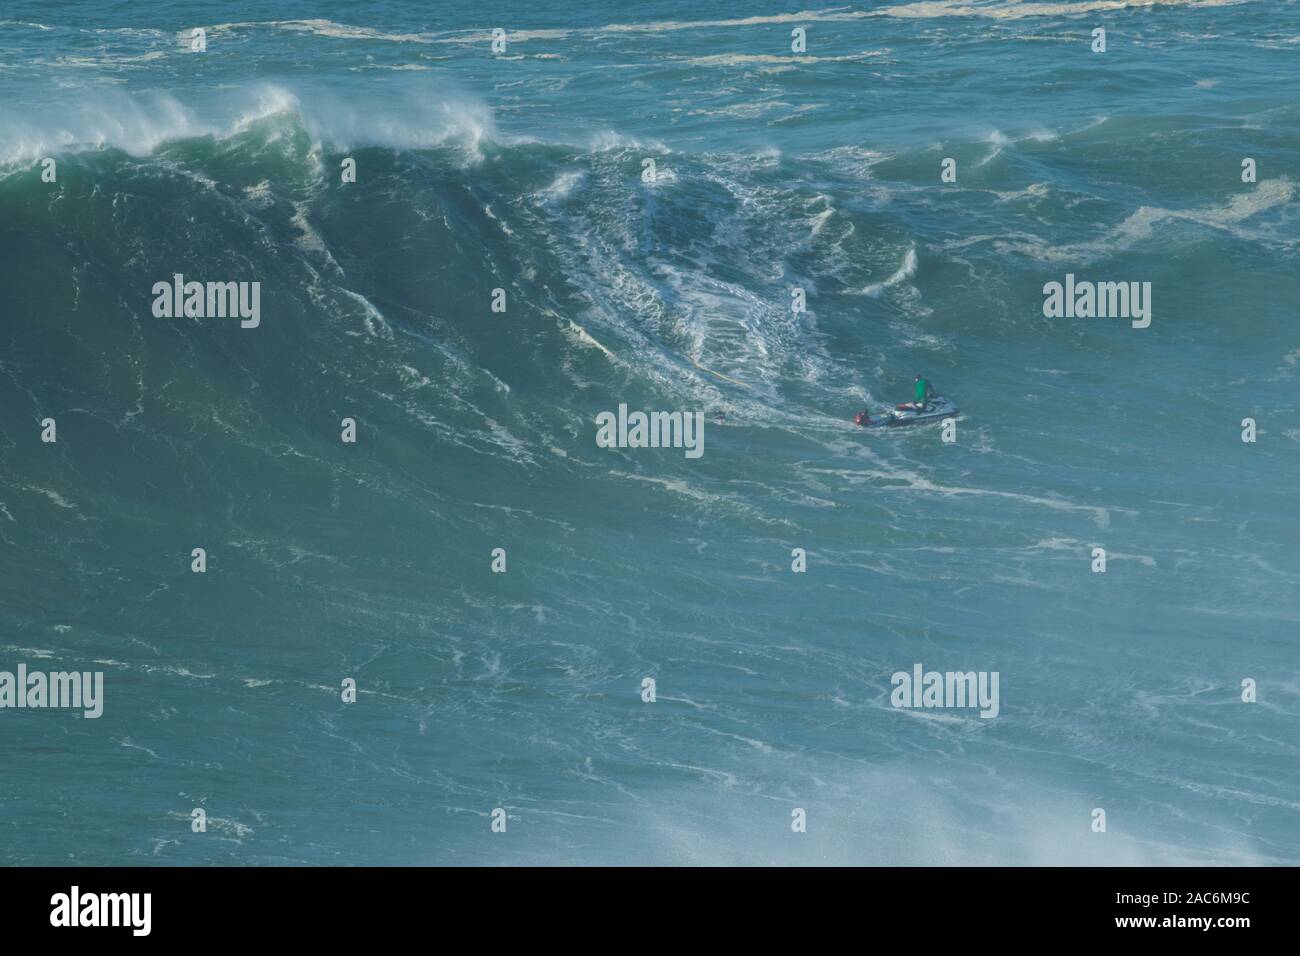 Pro surfer on the huge XXL 20-30 metre (70-100 feet) waves at the Praia do Norte Nazare Portugal Stock Photo